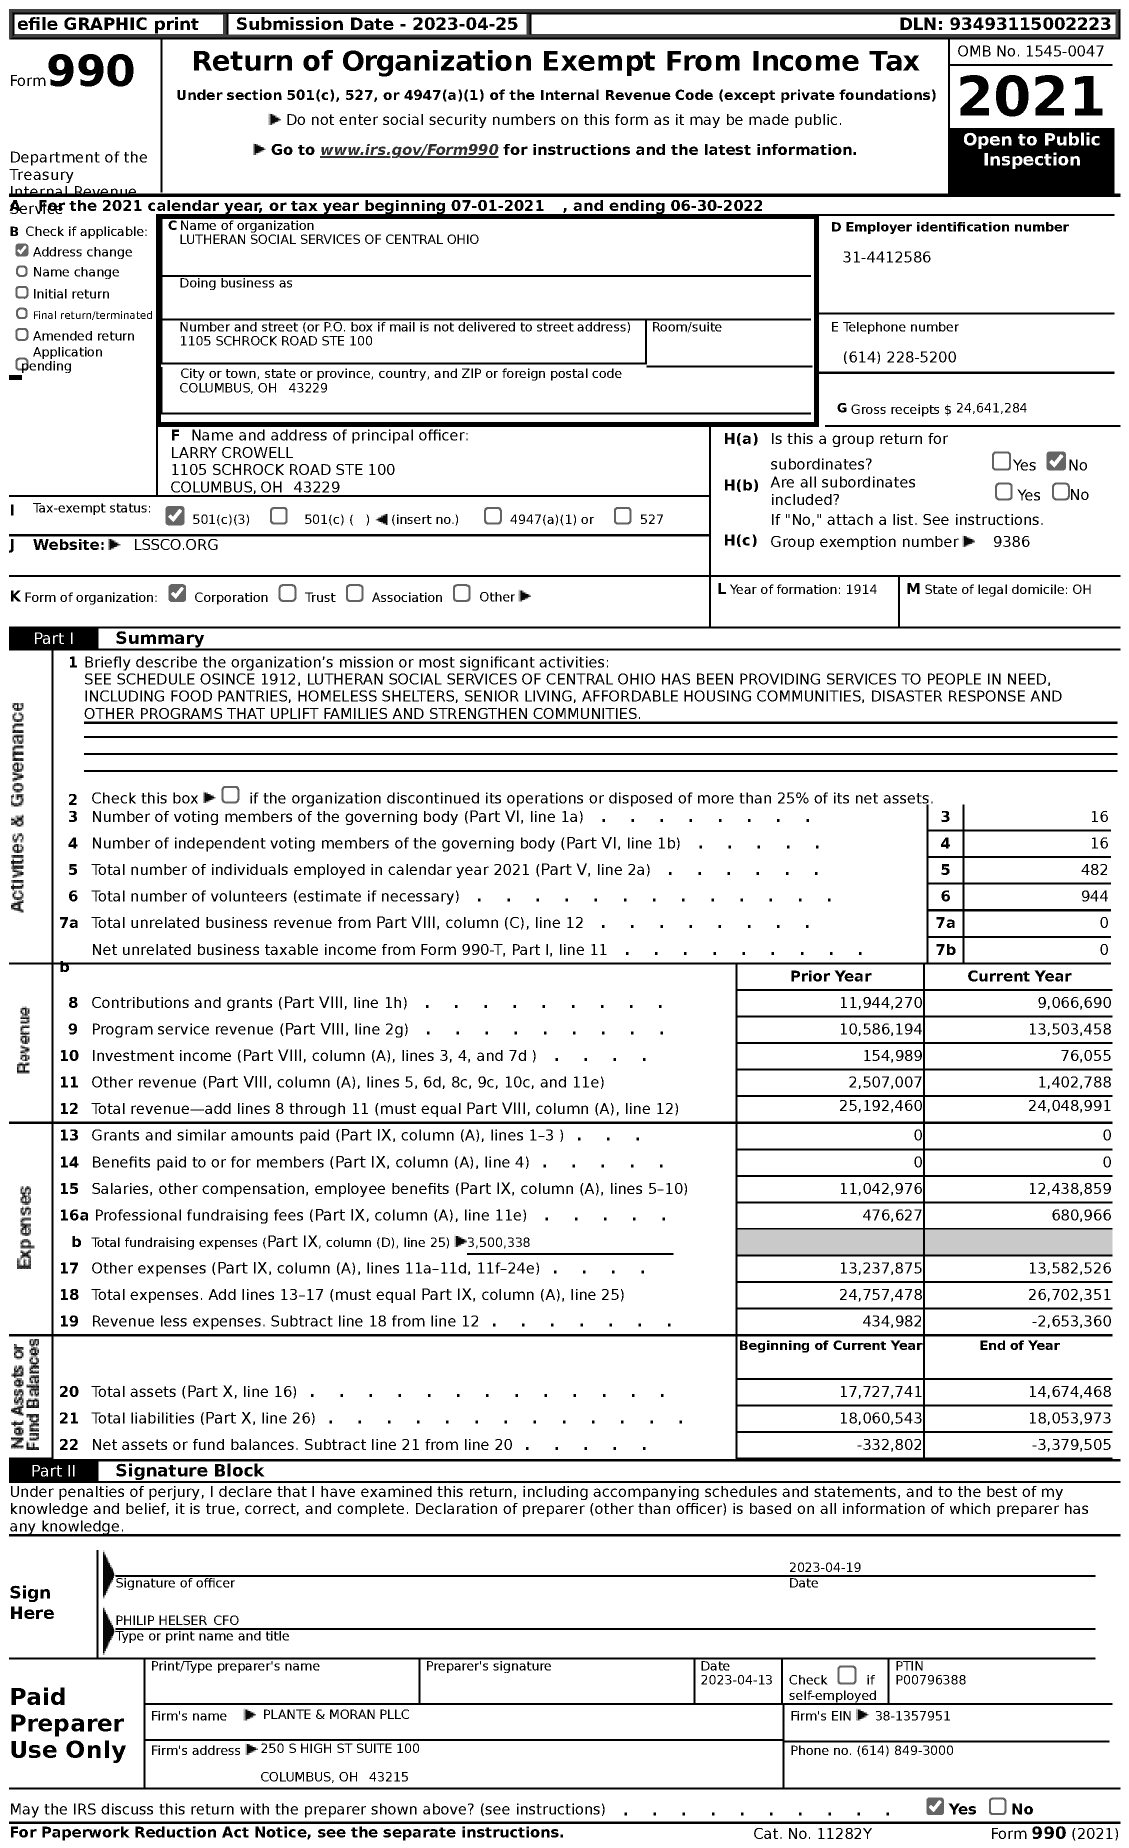 Image of first page of 2021 Form 990 for Lutheran Social Services of Central Ohio (LSS)